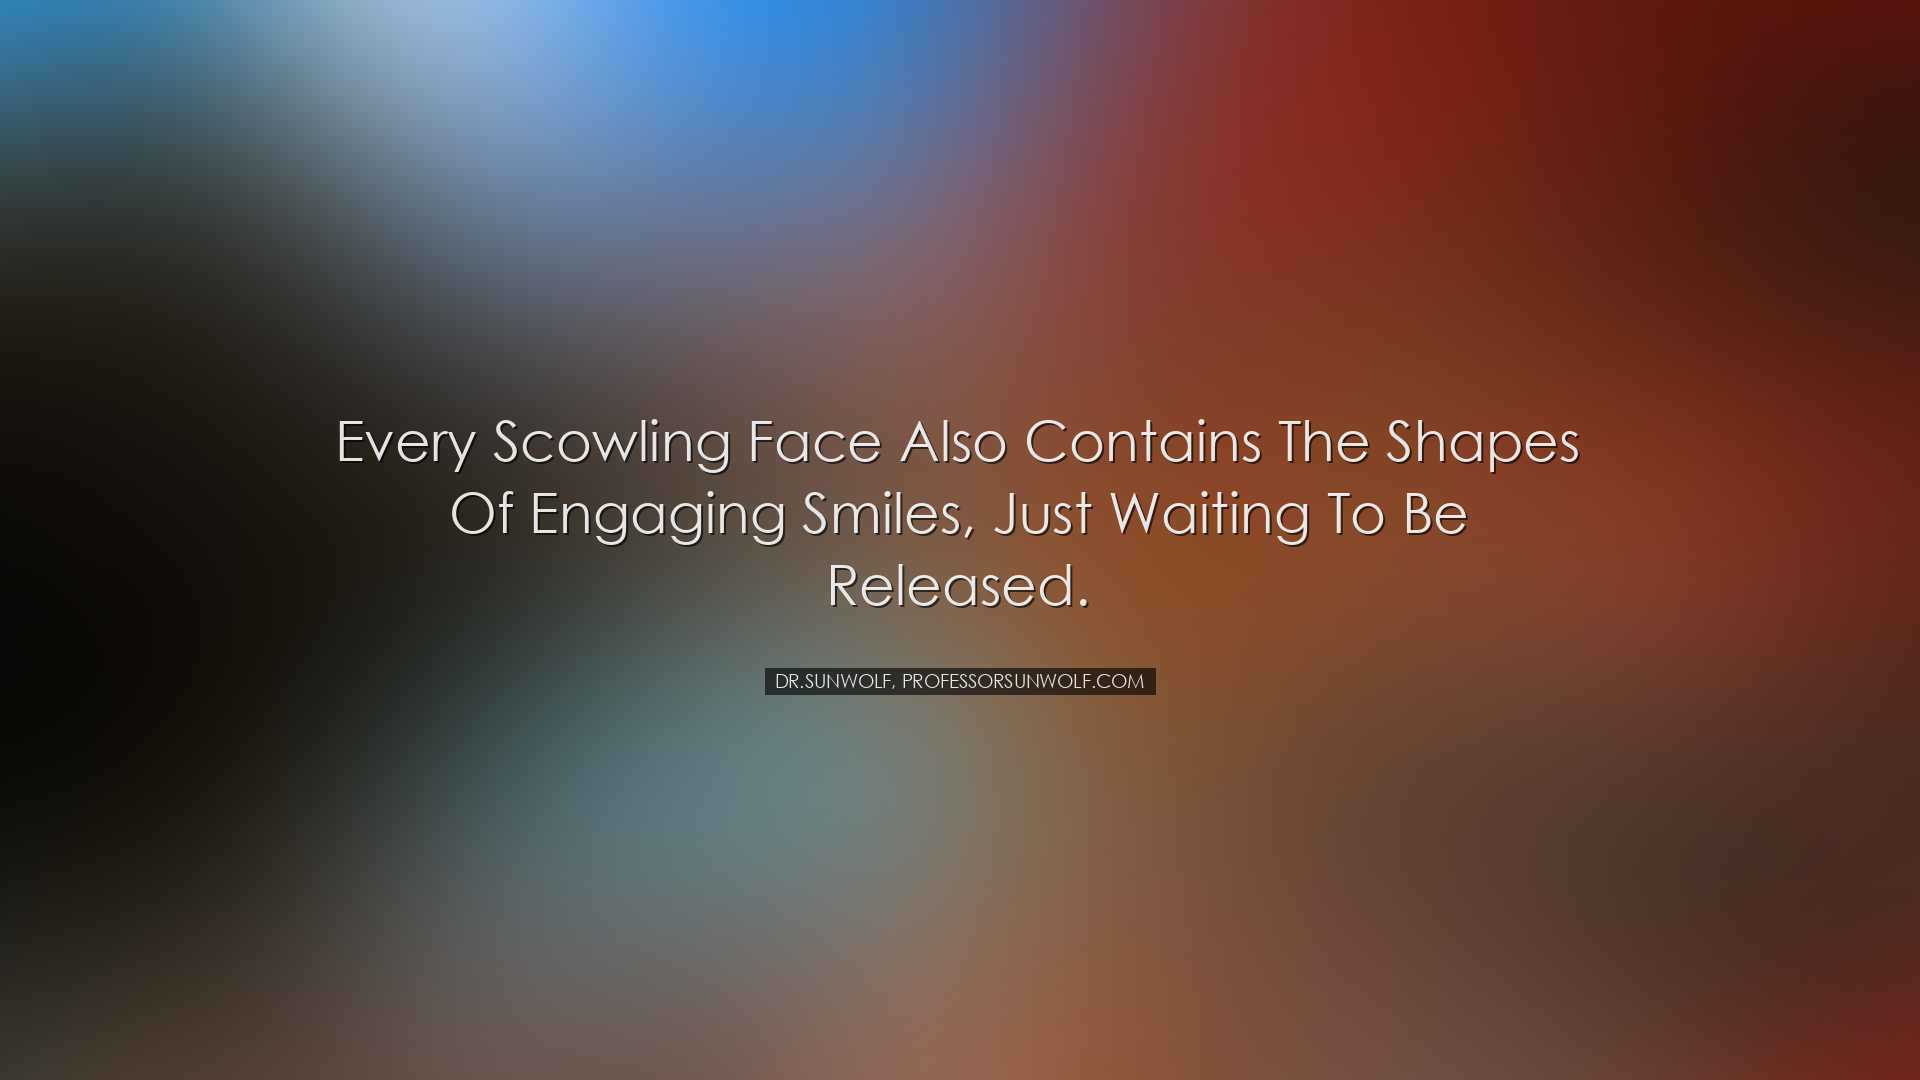 Every scowling face also contains the shapes of engaging smiles, j